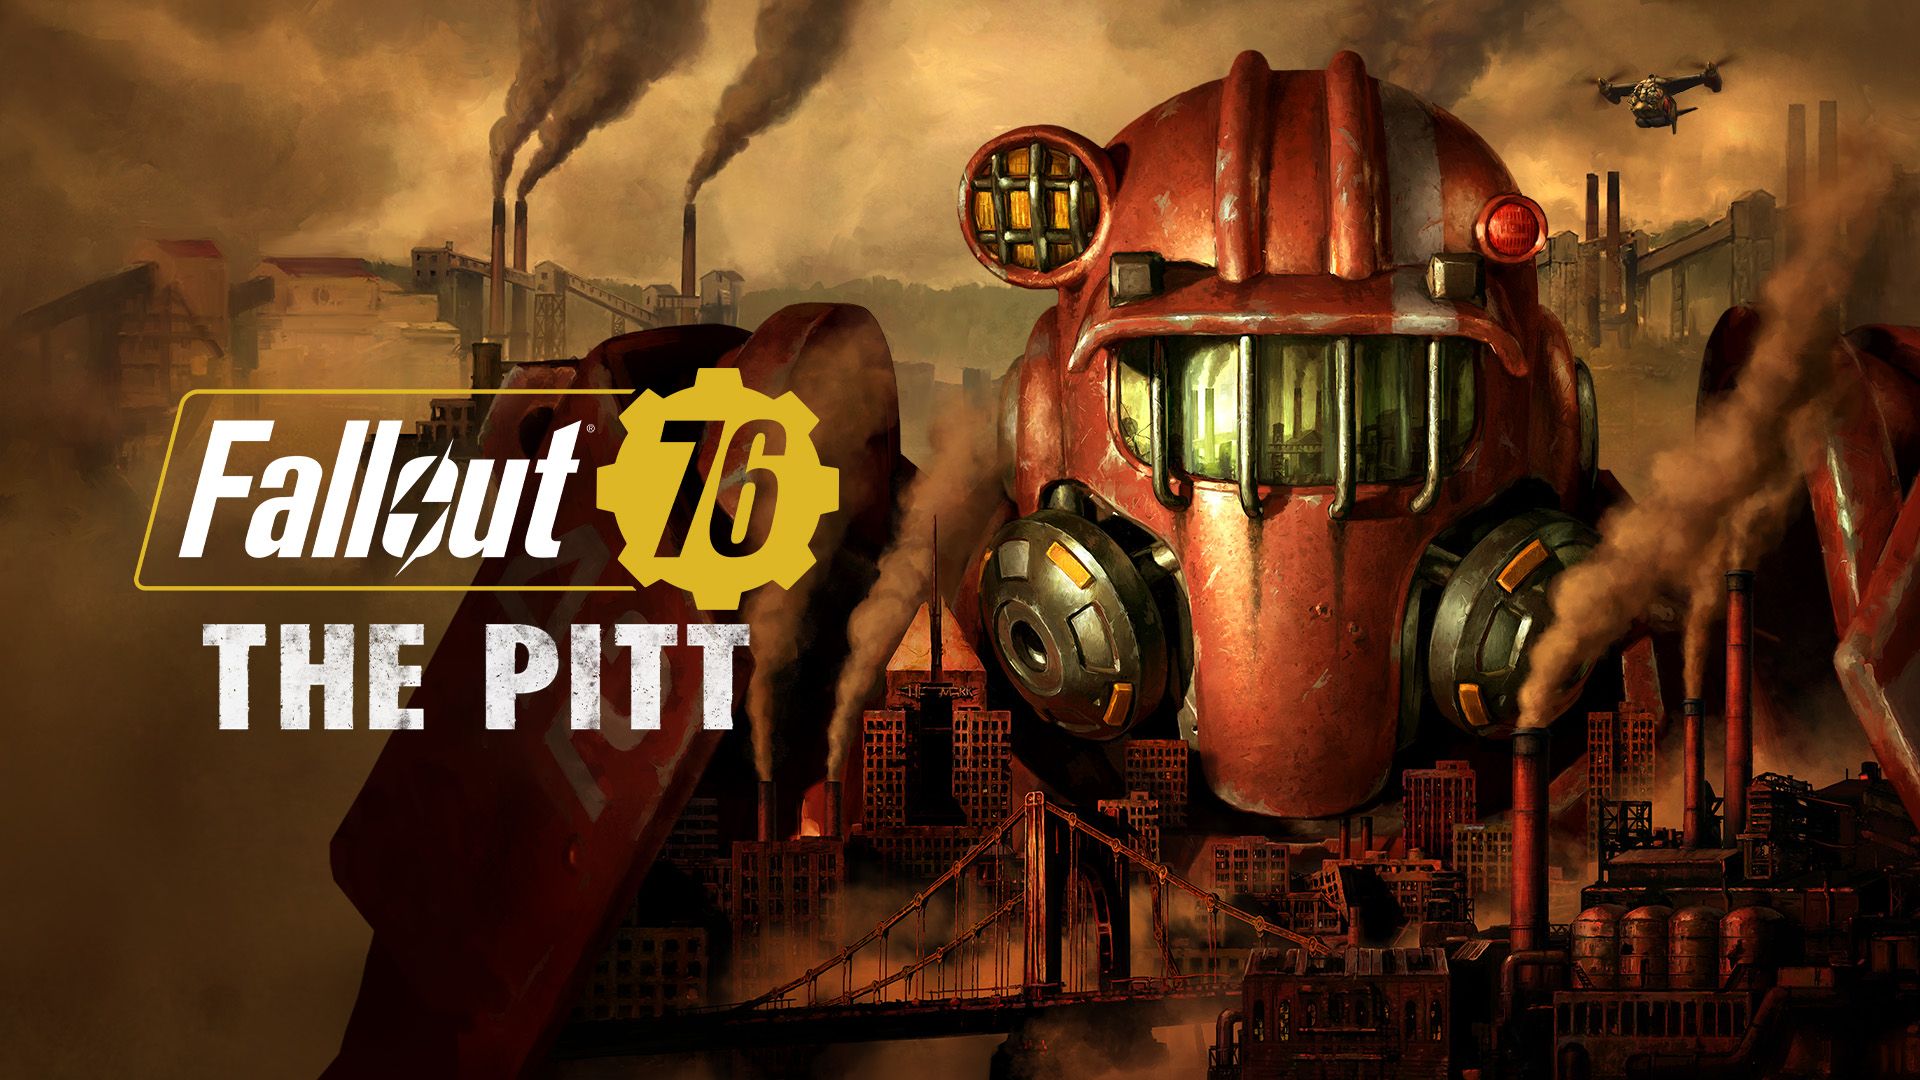 enter-the-pitt-now-with-fallout-76-s-expeditions-update-knowledge-and-brain-activity-with-fun